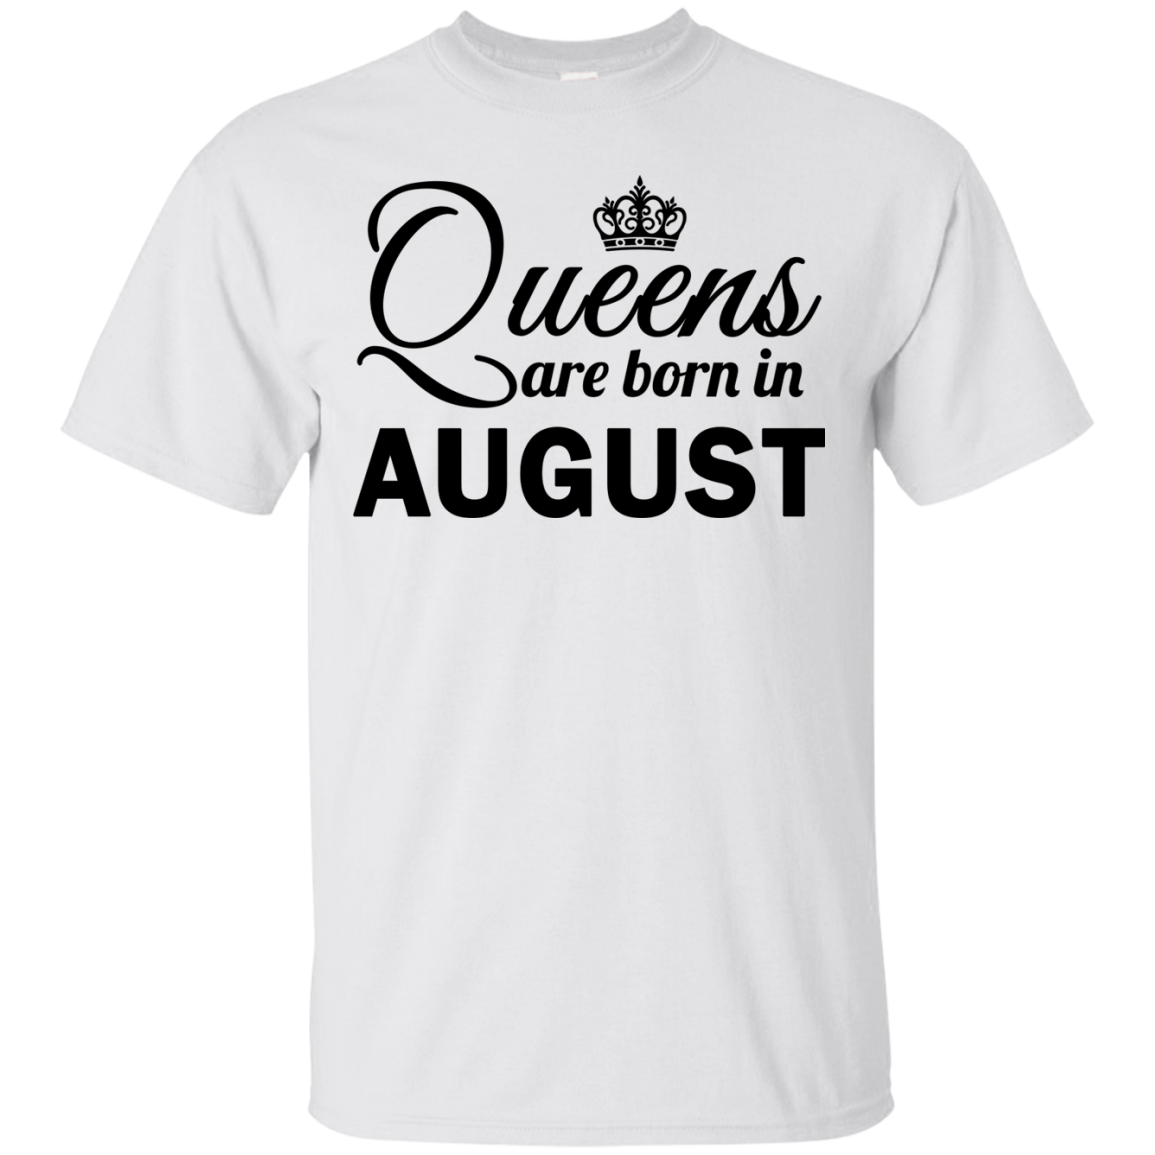 Queens are born in August shirt, tank top, sweater